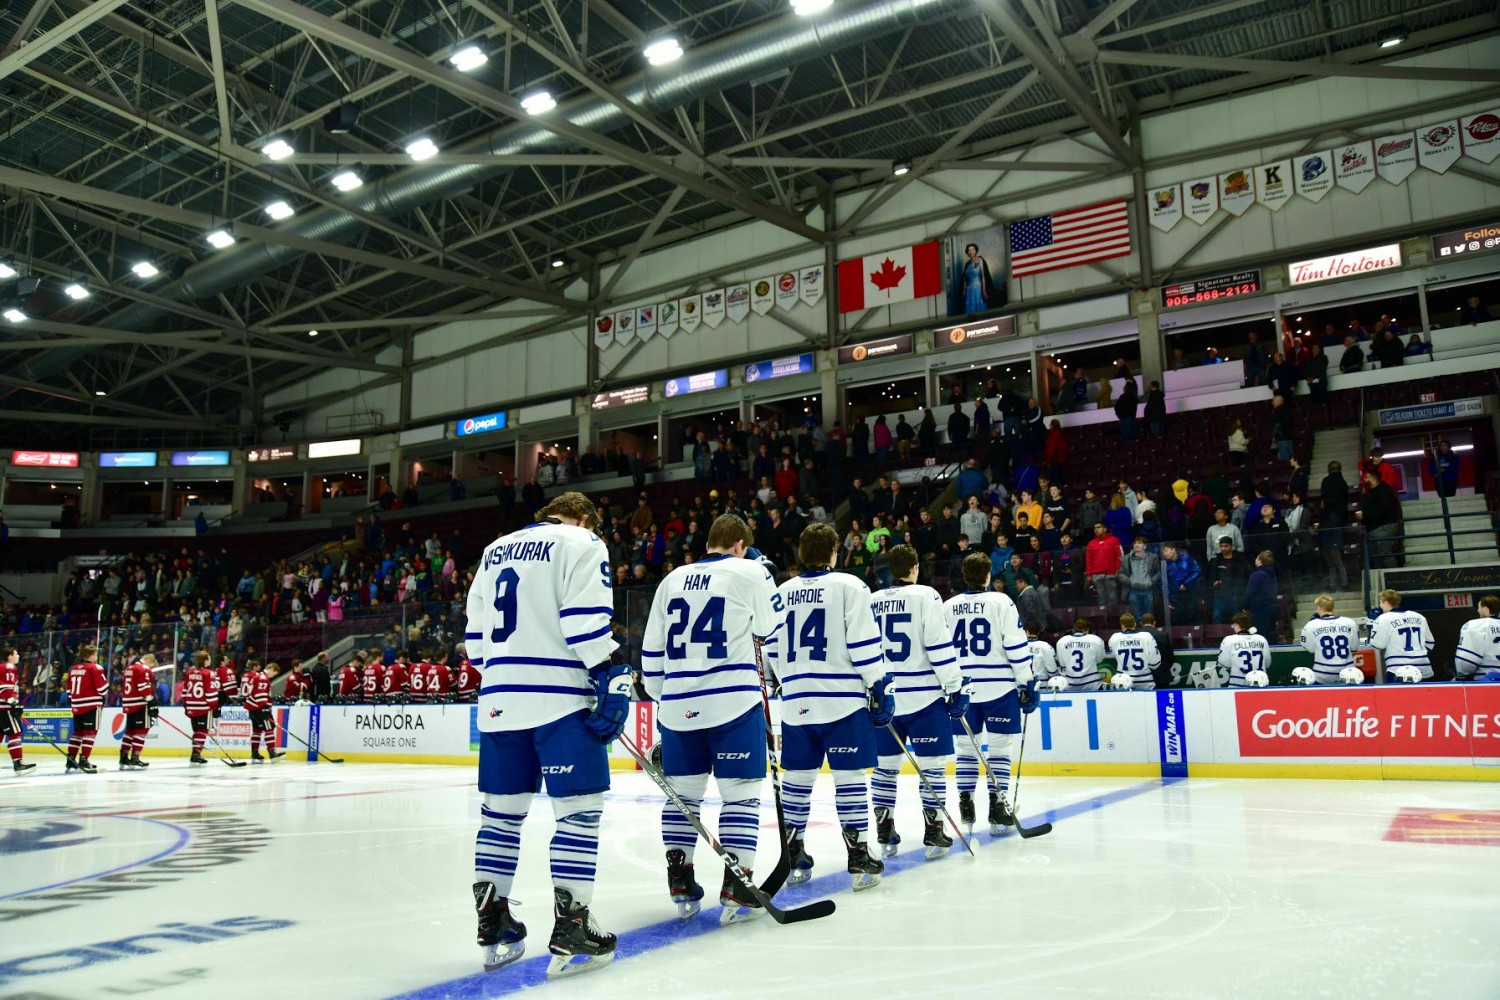 Future for Mississauga hockey stars frozen as COVID-19 cancels OHL season